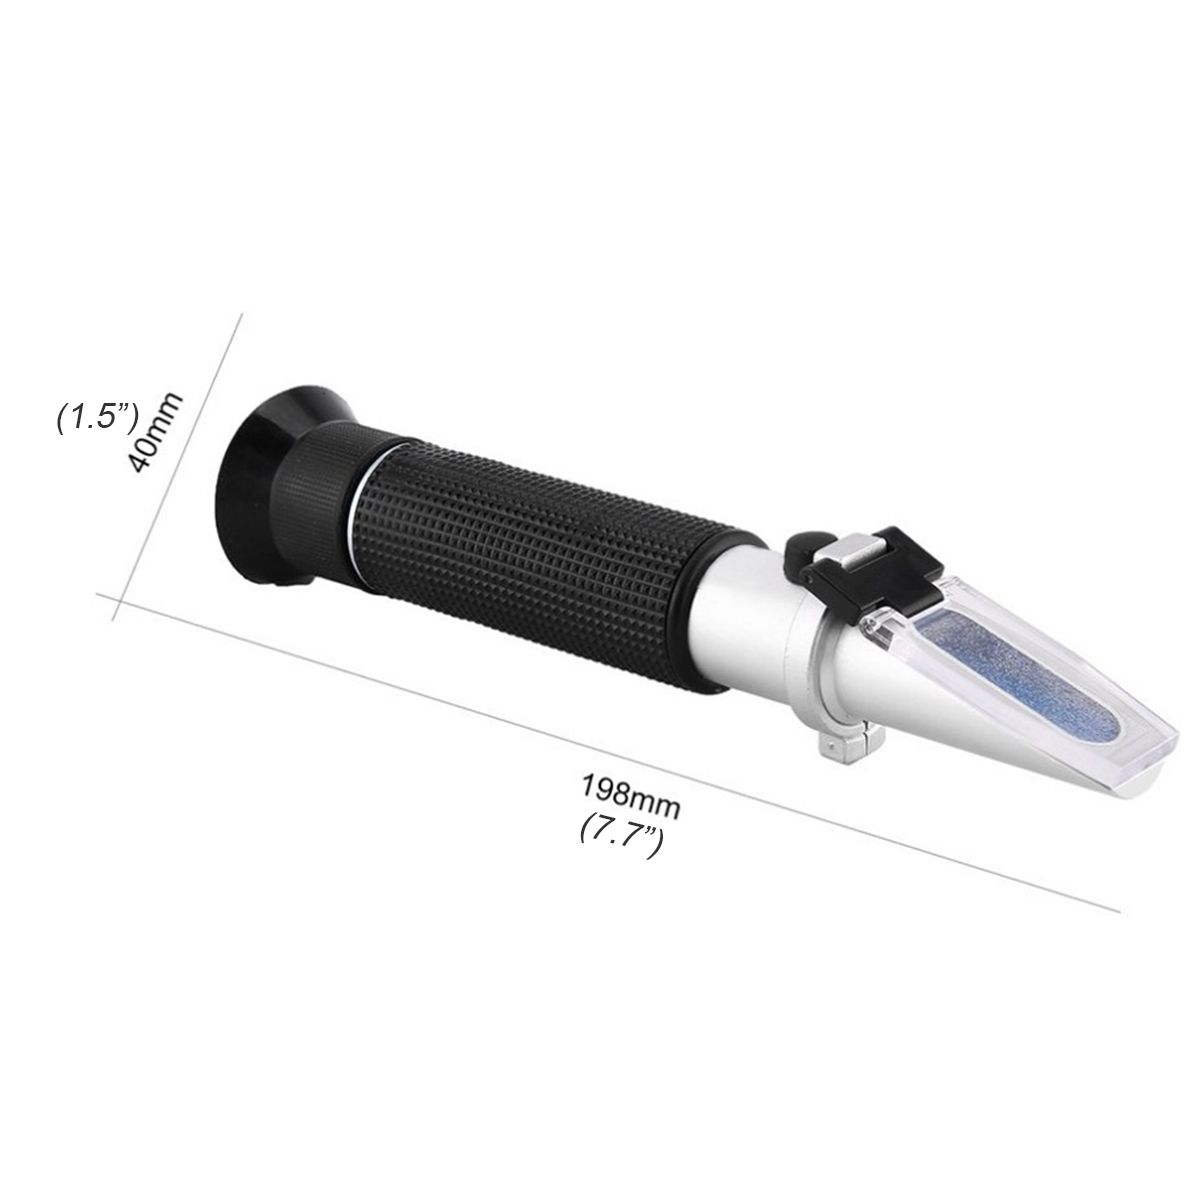 Refractometer-Alcohol-Alcoholometer-080-ATC-Handheld-Tool-Alcohol-Meter-1549745